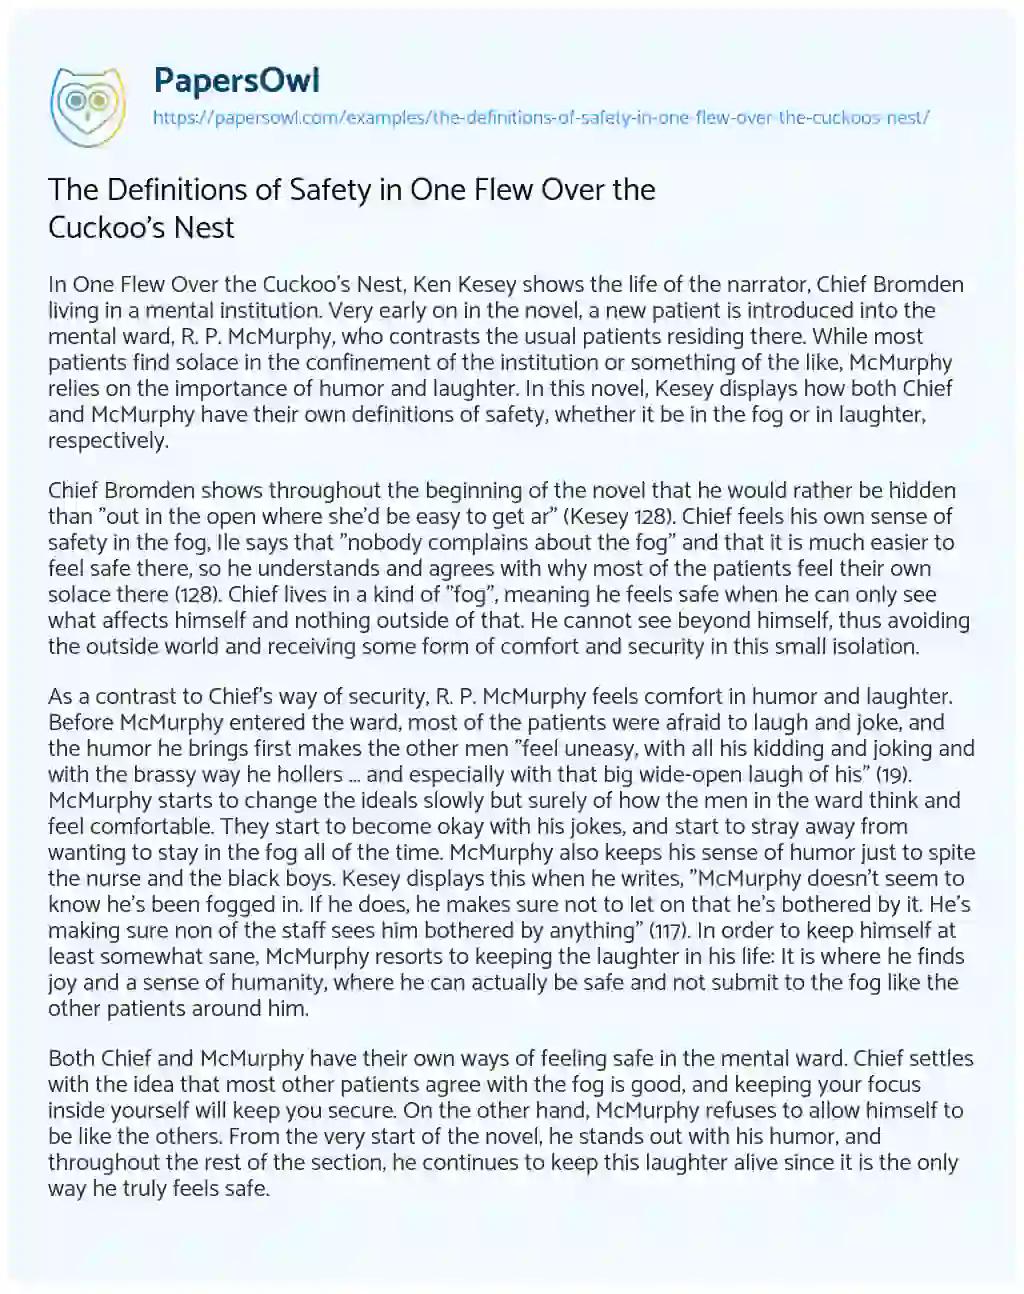 Essay on The Definitions of Safety in One Flew over the Cuckoo’s Nest